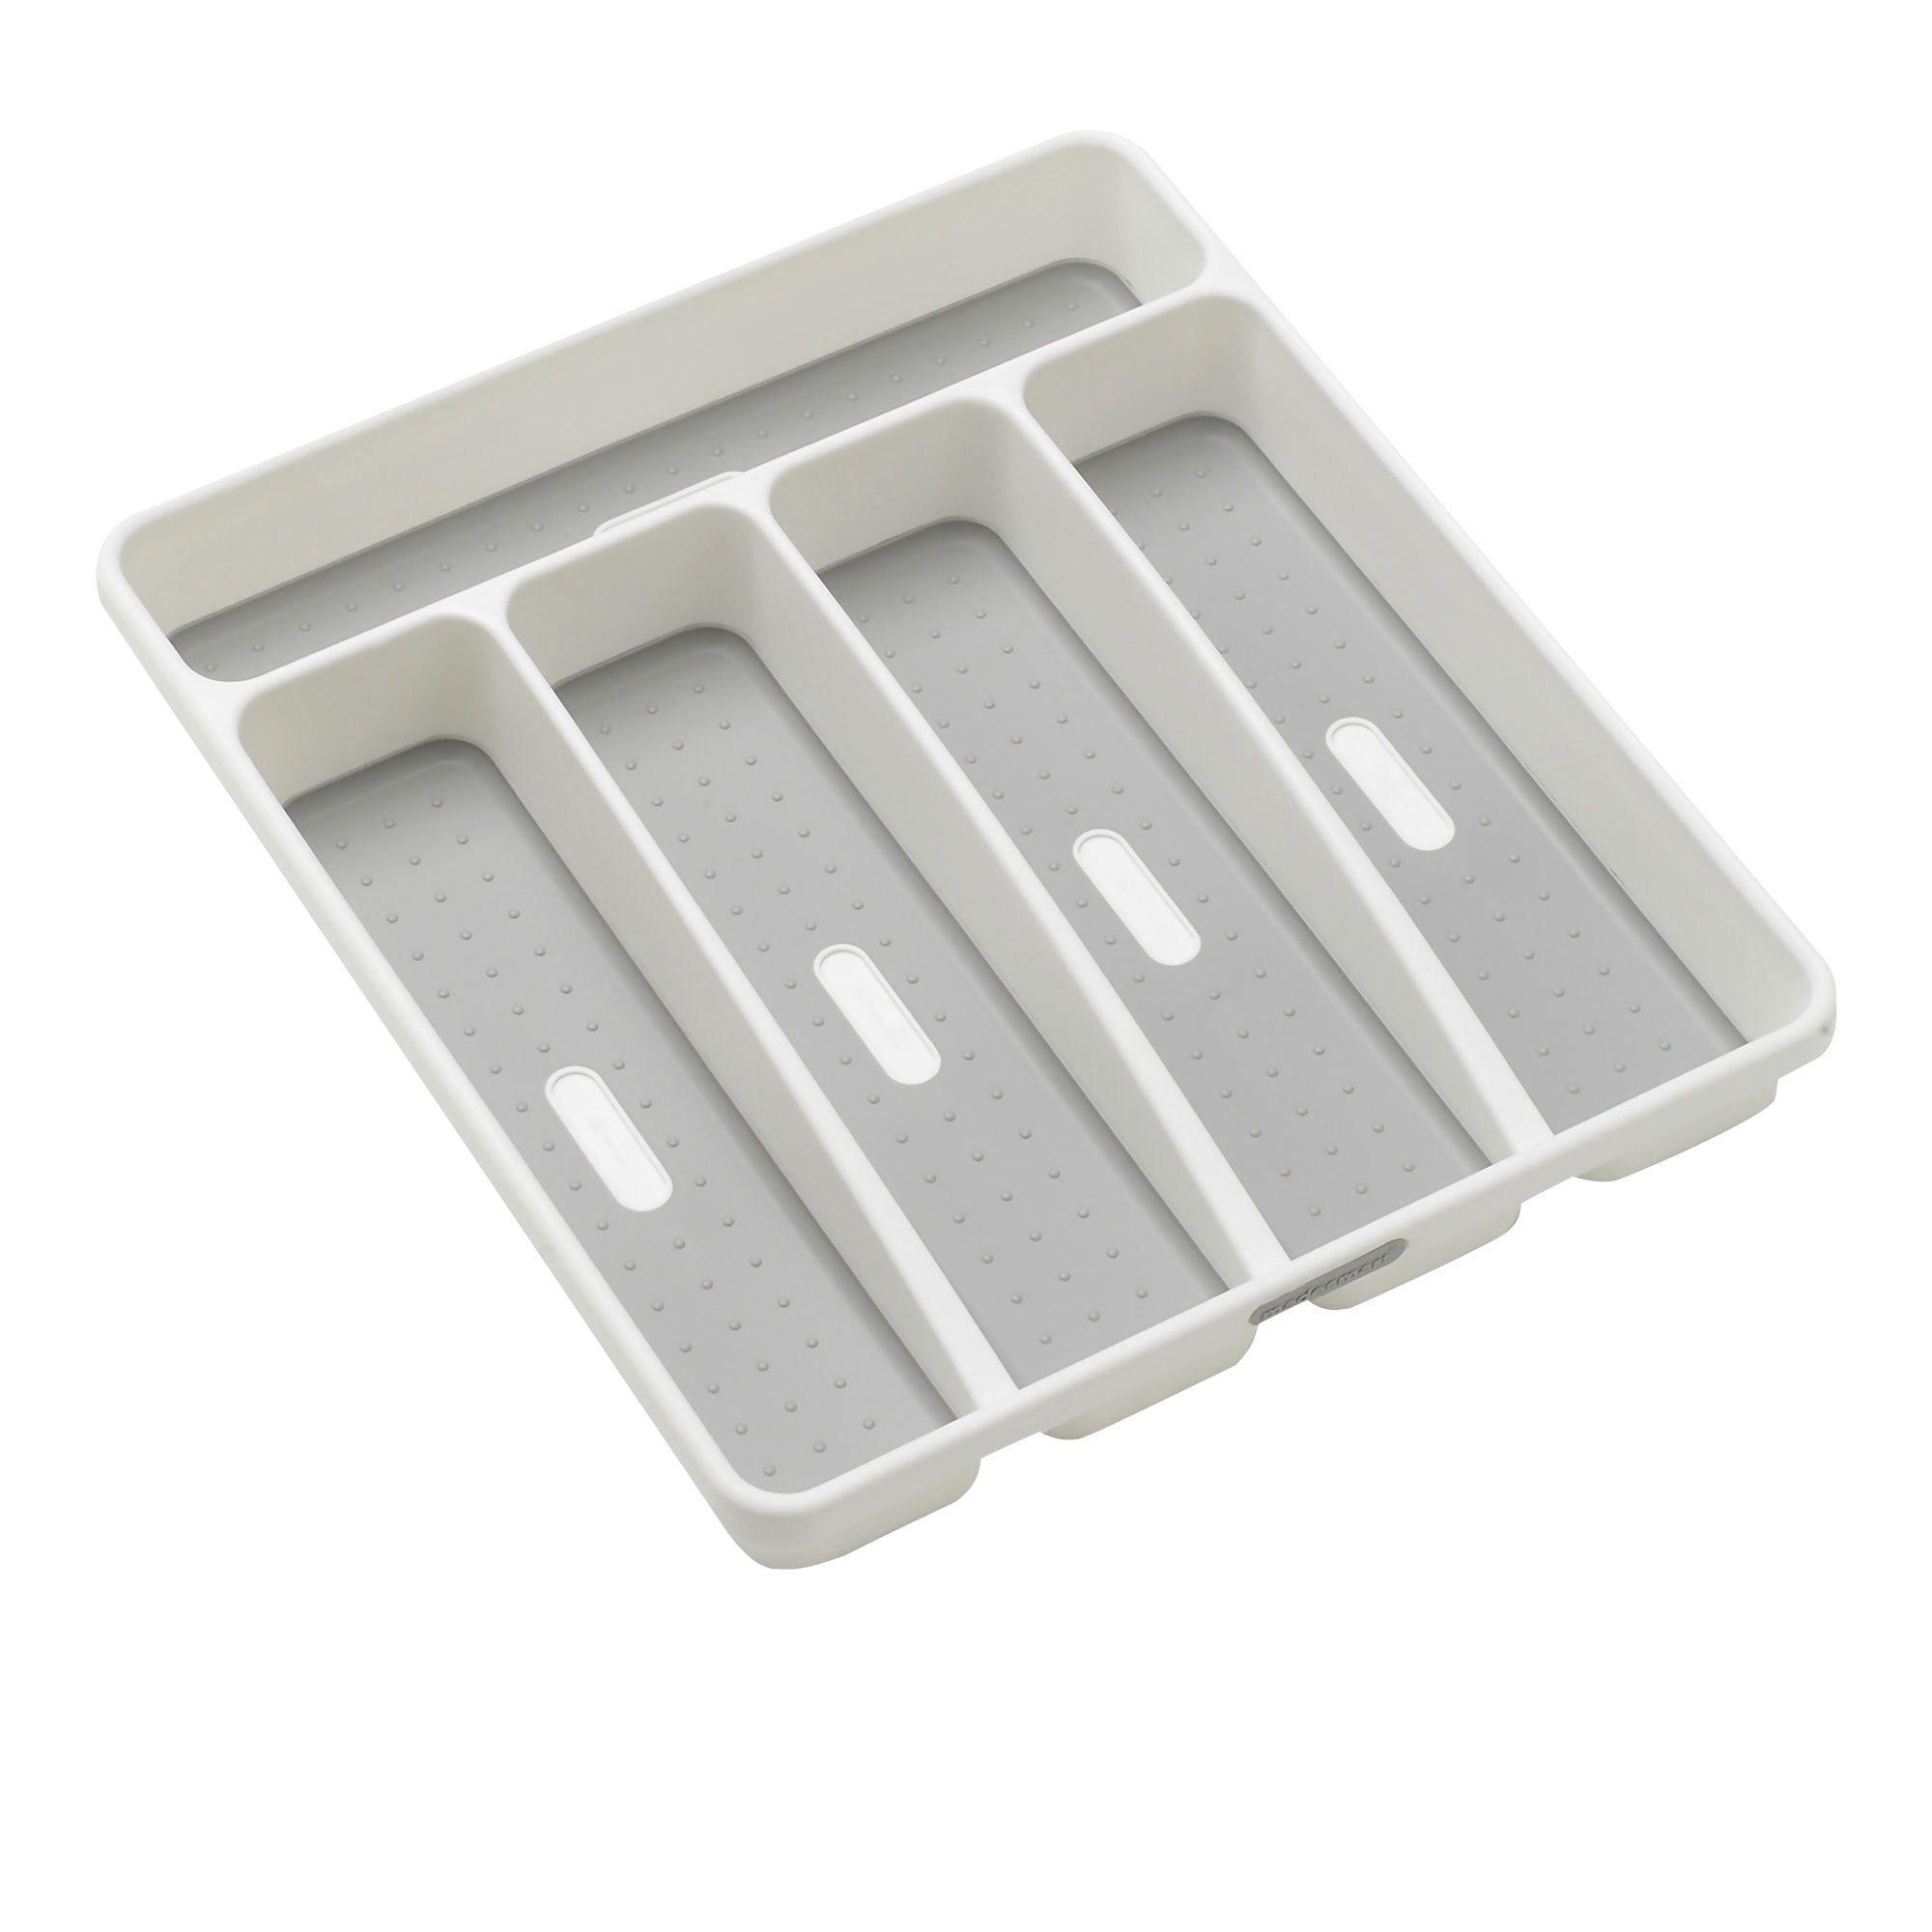 Madesmart Cutlery Tray 5 Compartment White Image 1